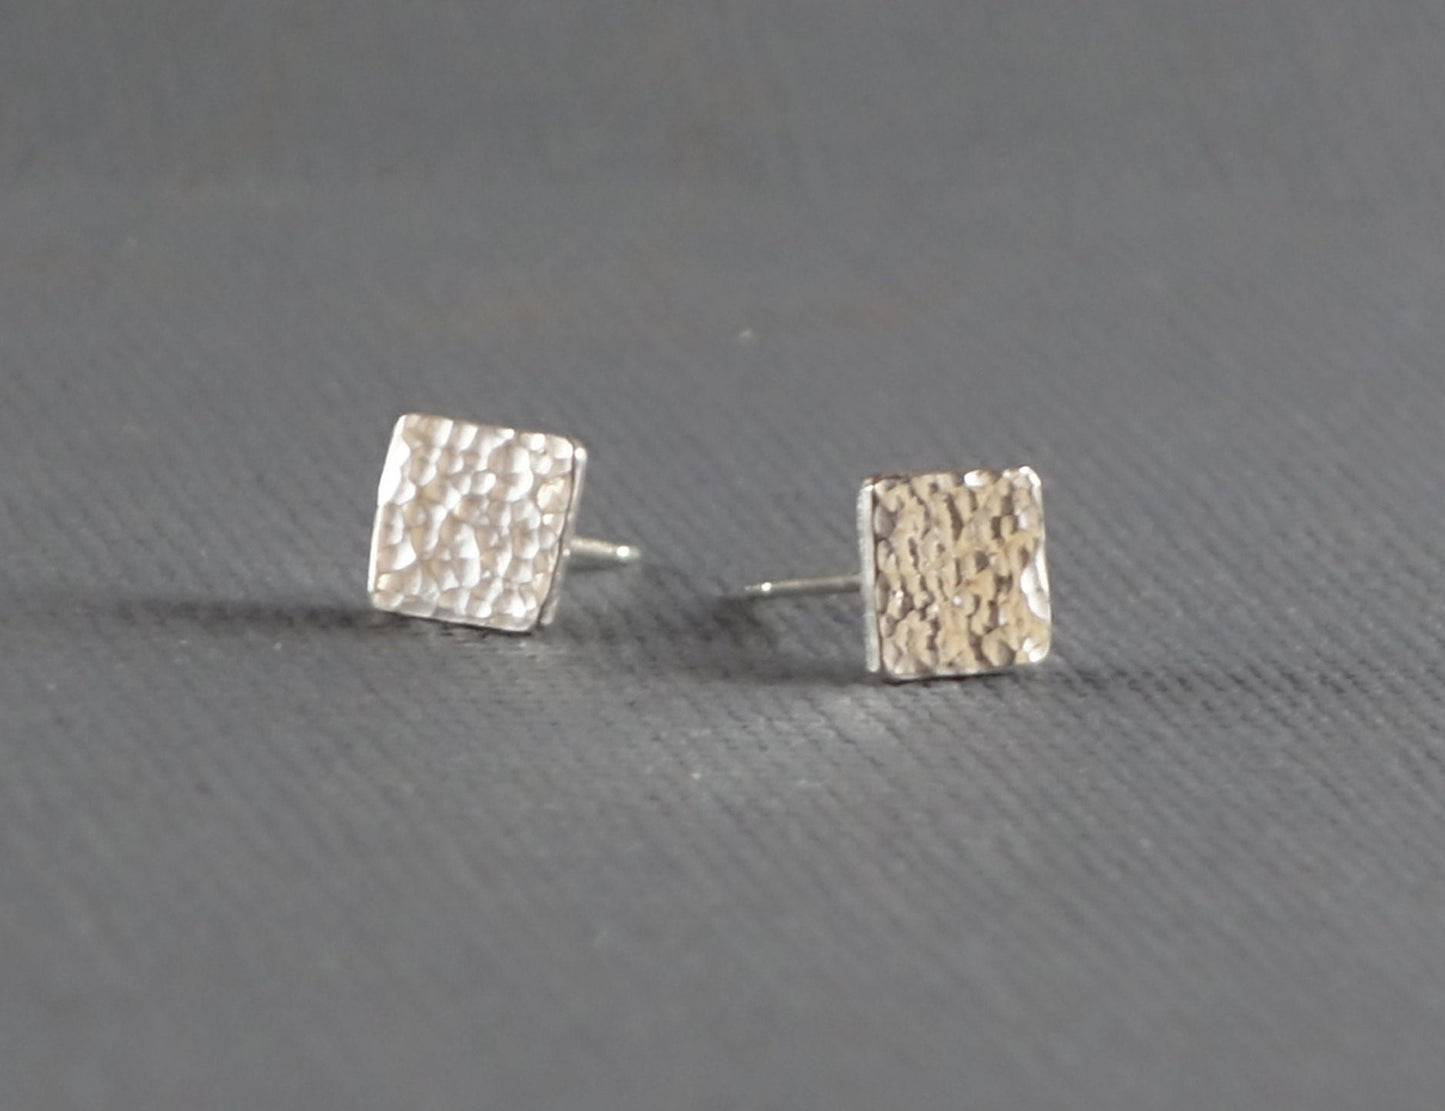 Silver Square Studs, Shiny Silver Square Post Earrings